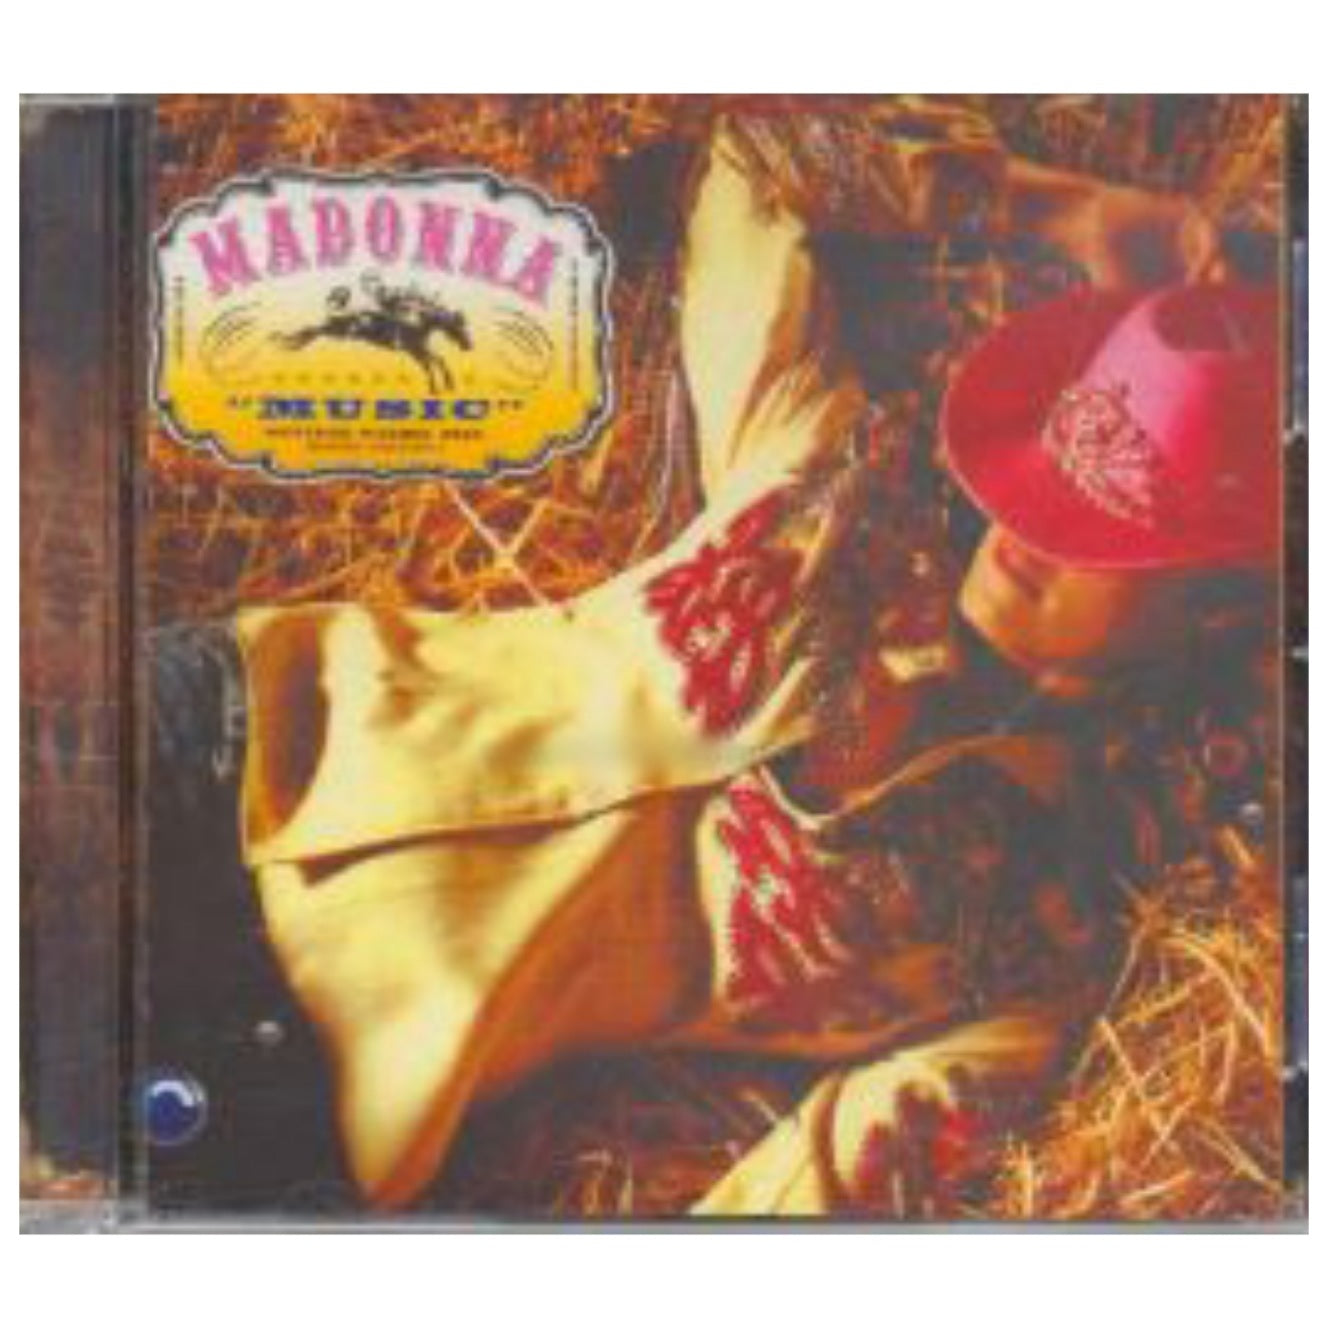 Madonna: Music - Chile CD Single - 3-Track Limited Edition chilenischer Import